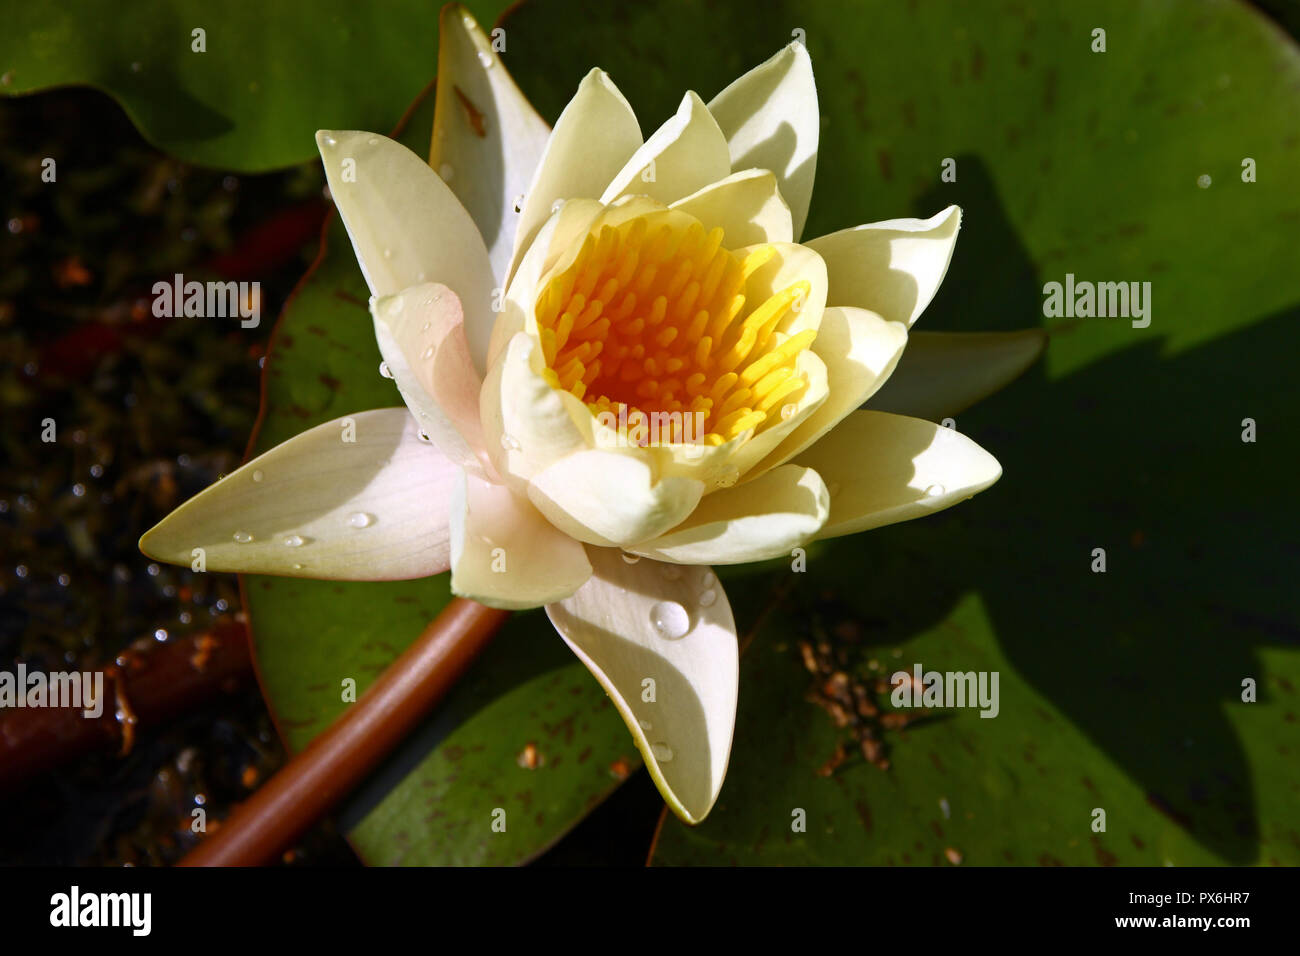 Flower of yellow water lily, closeup Stock Photo